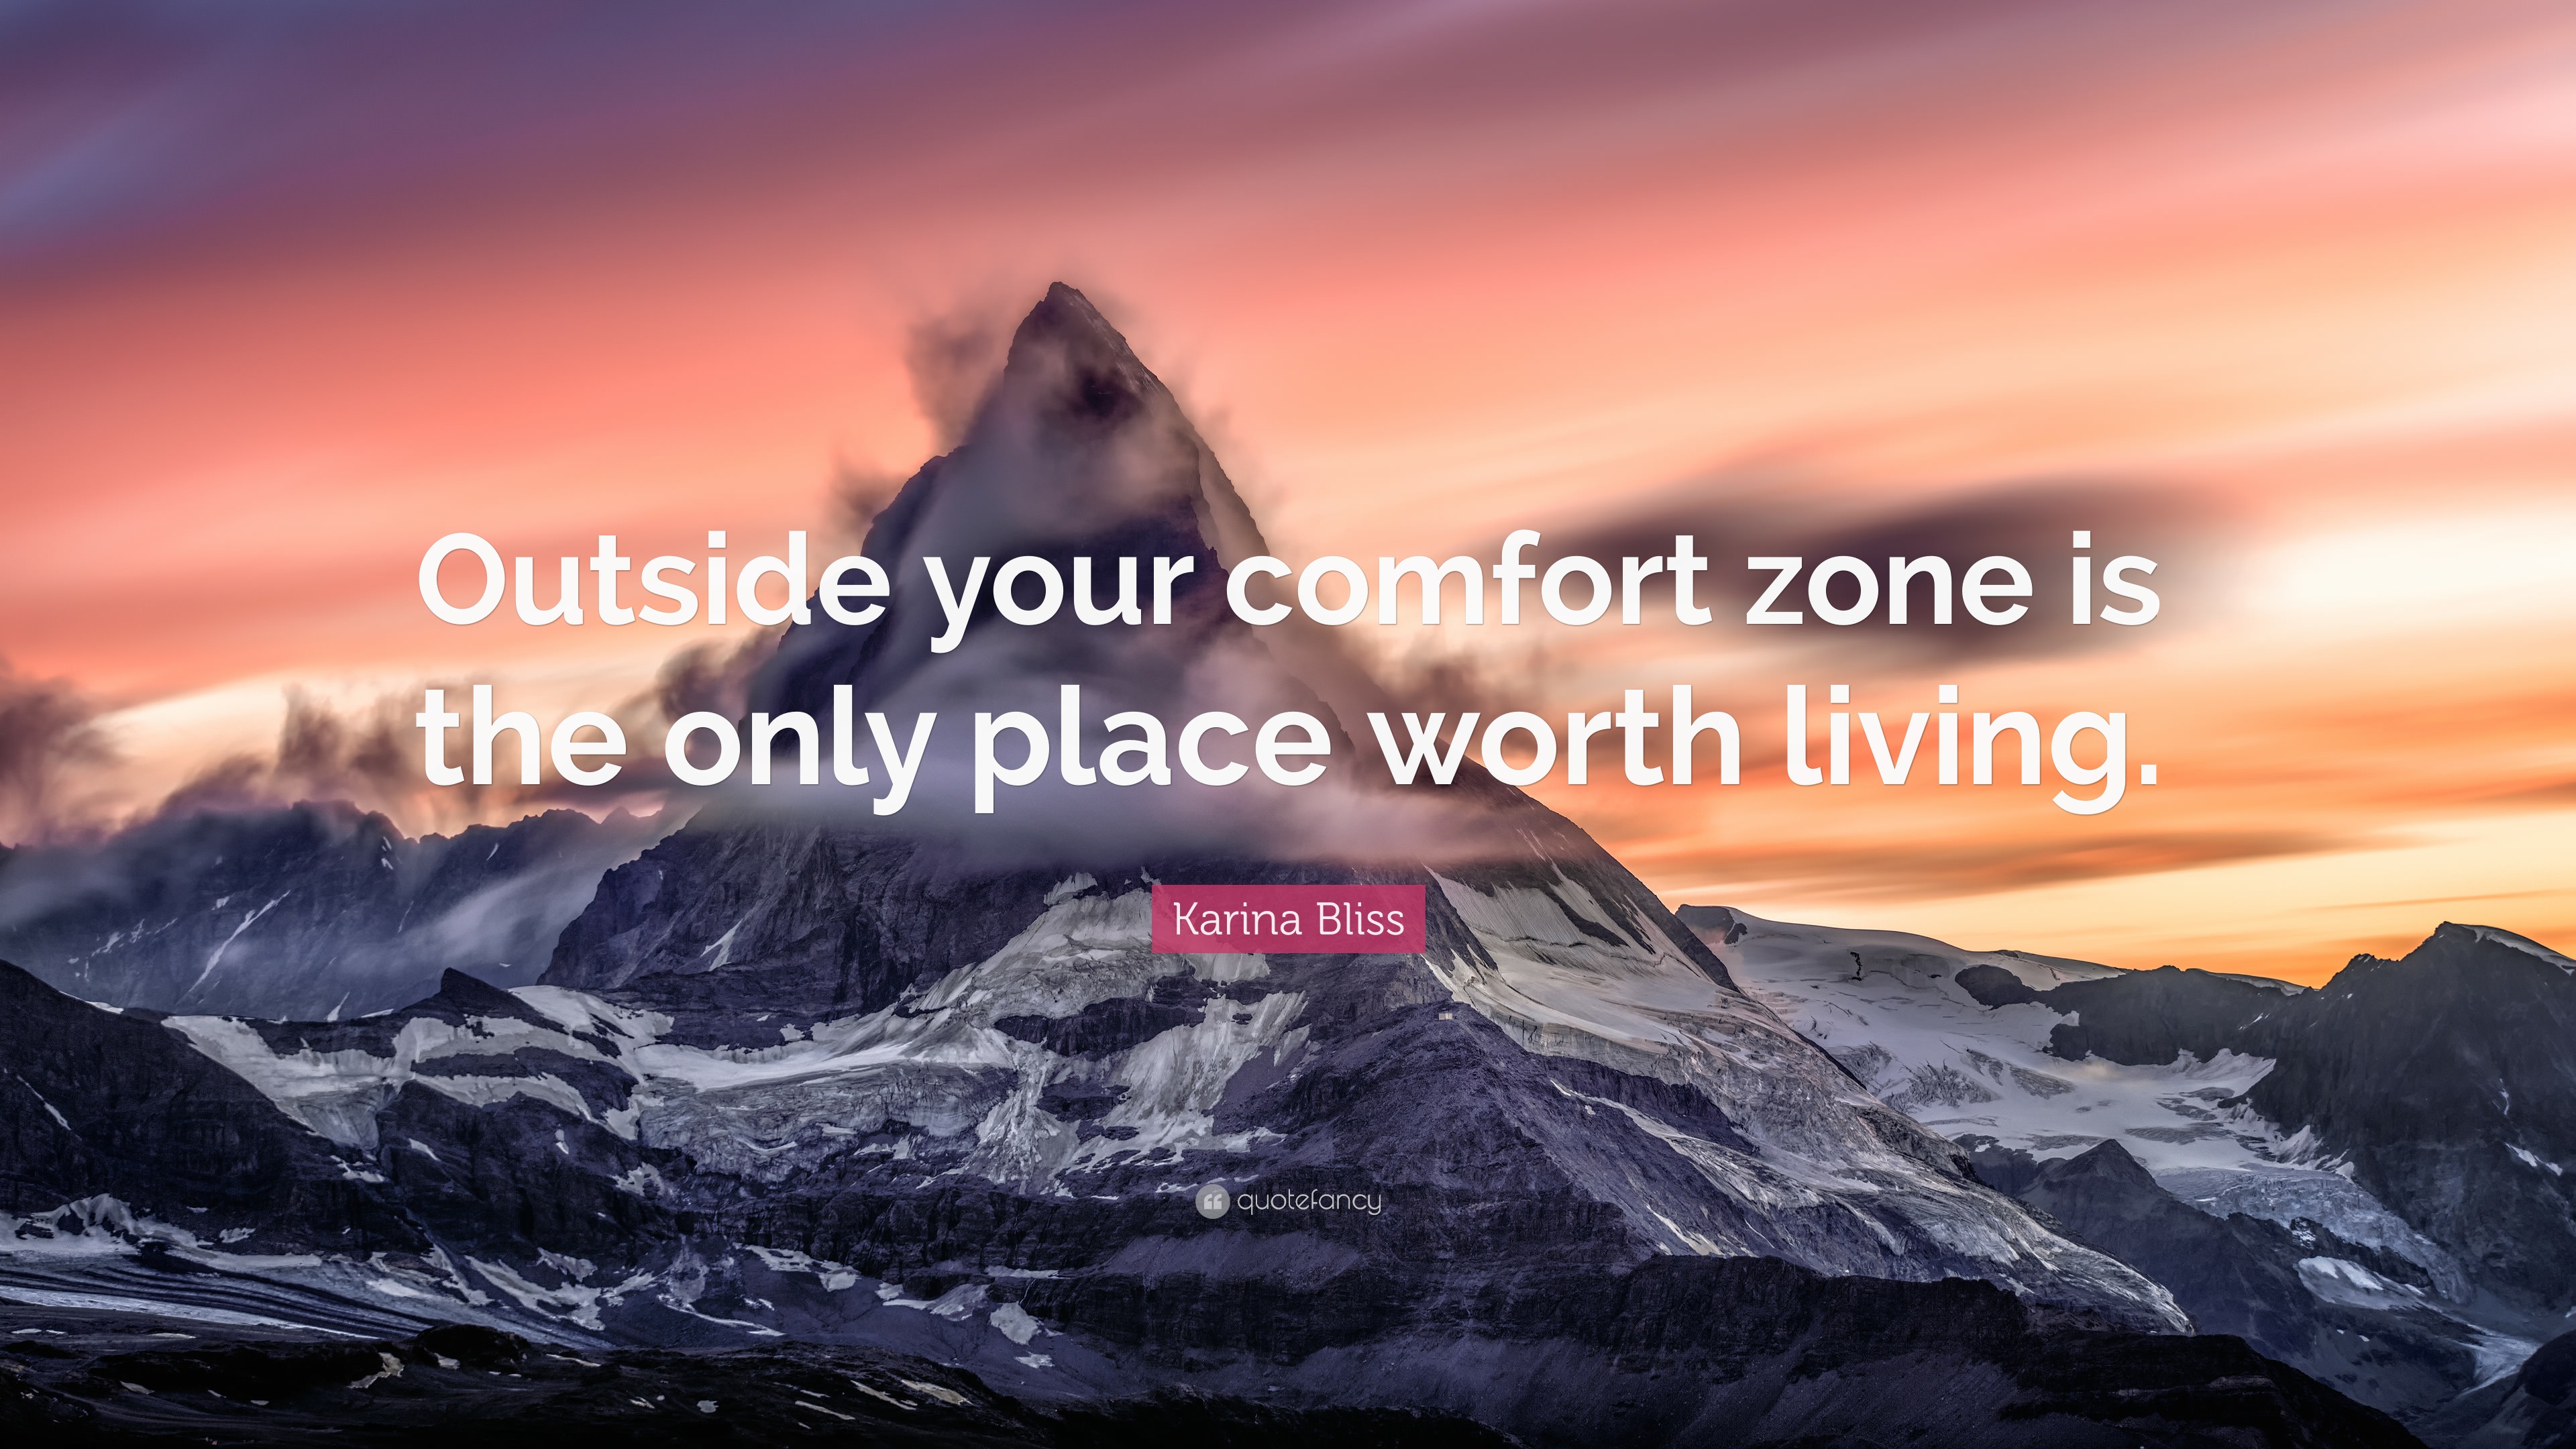 Karina Bliss Quote: “Outside your comfort zone is the only place